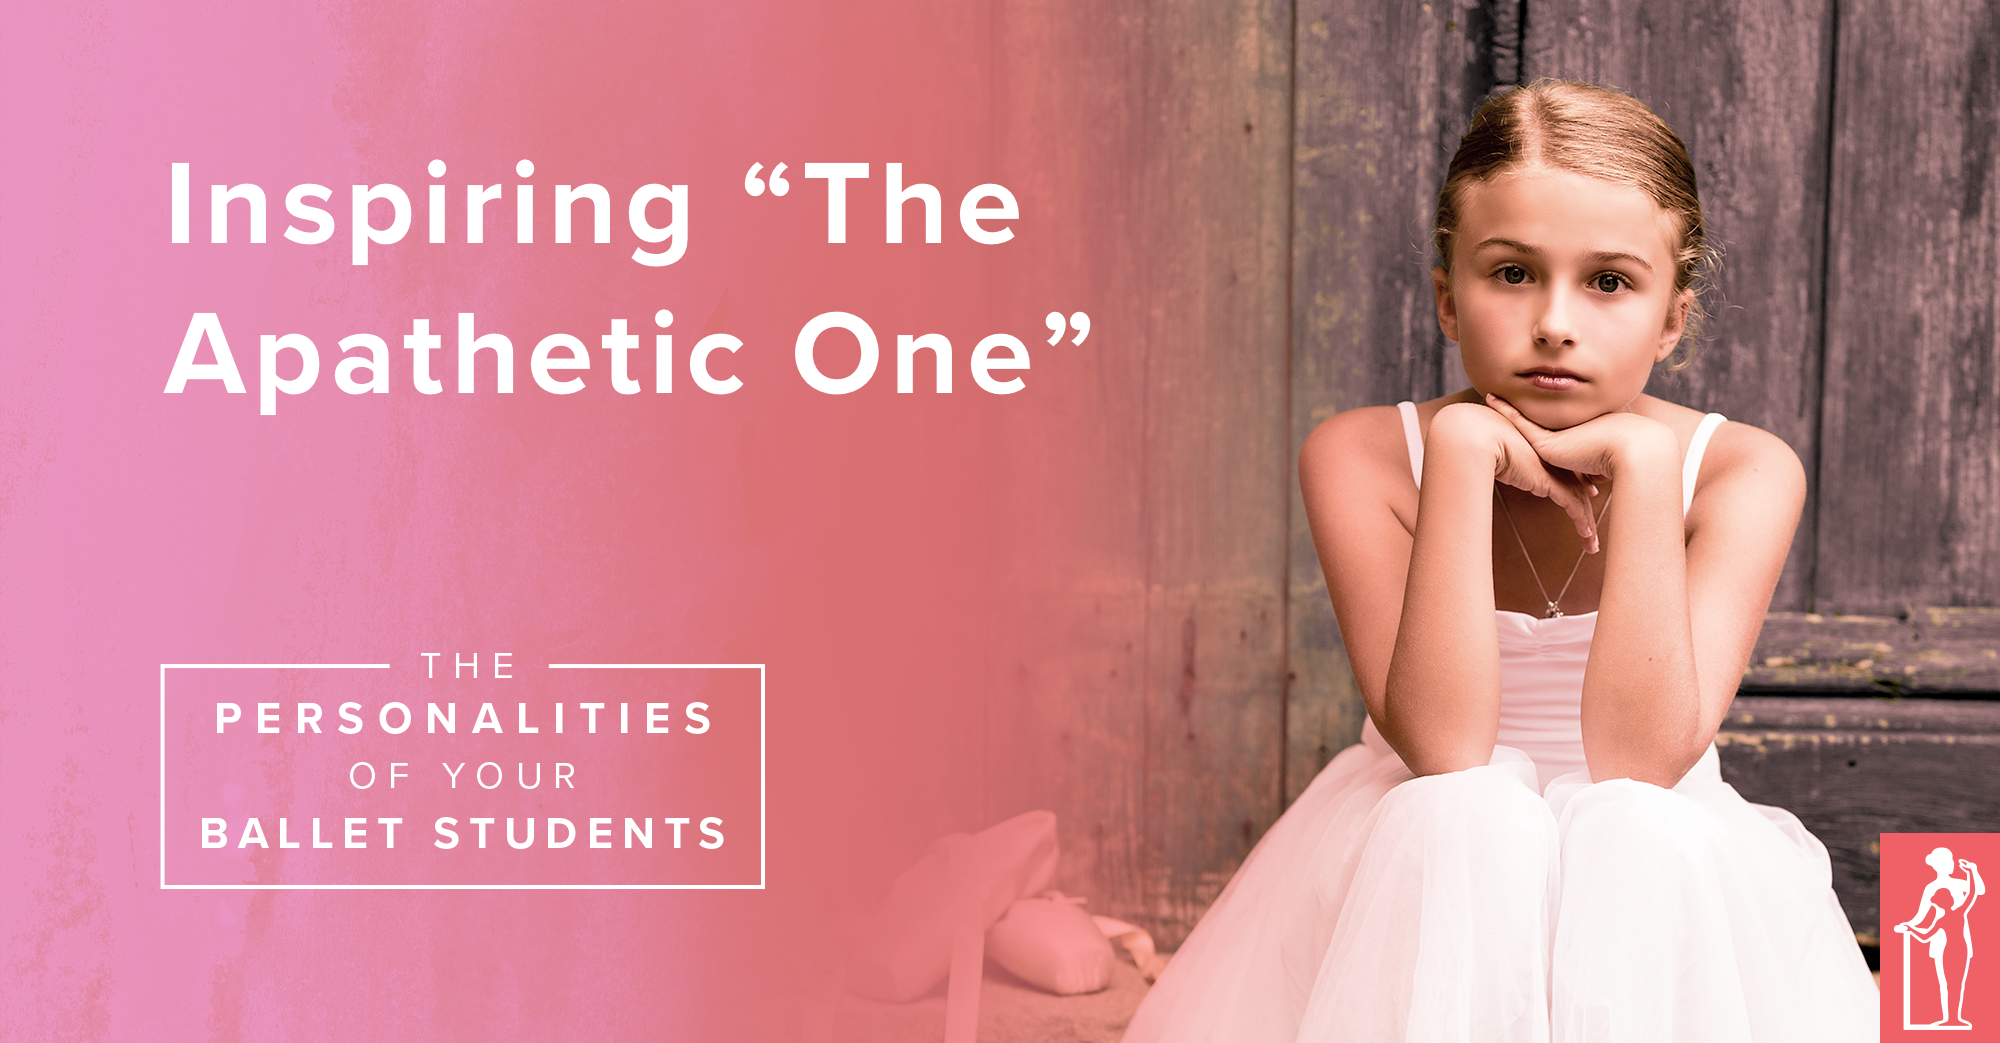 Ballet Student Personalities: "The Apathetic One"